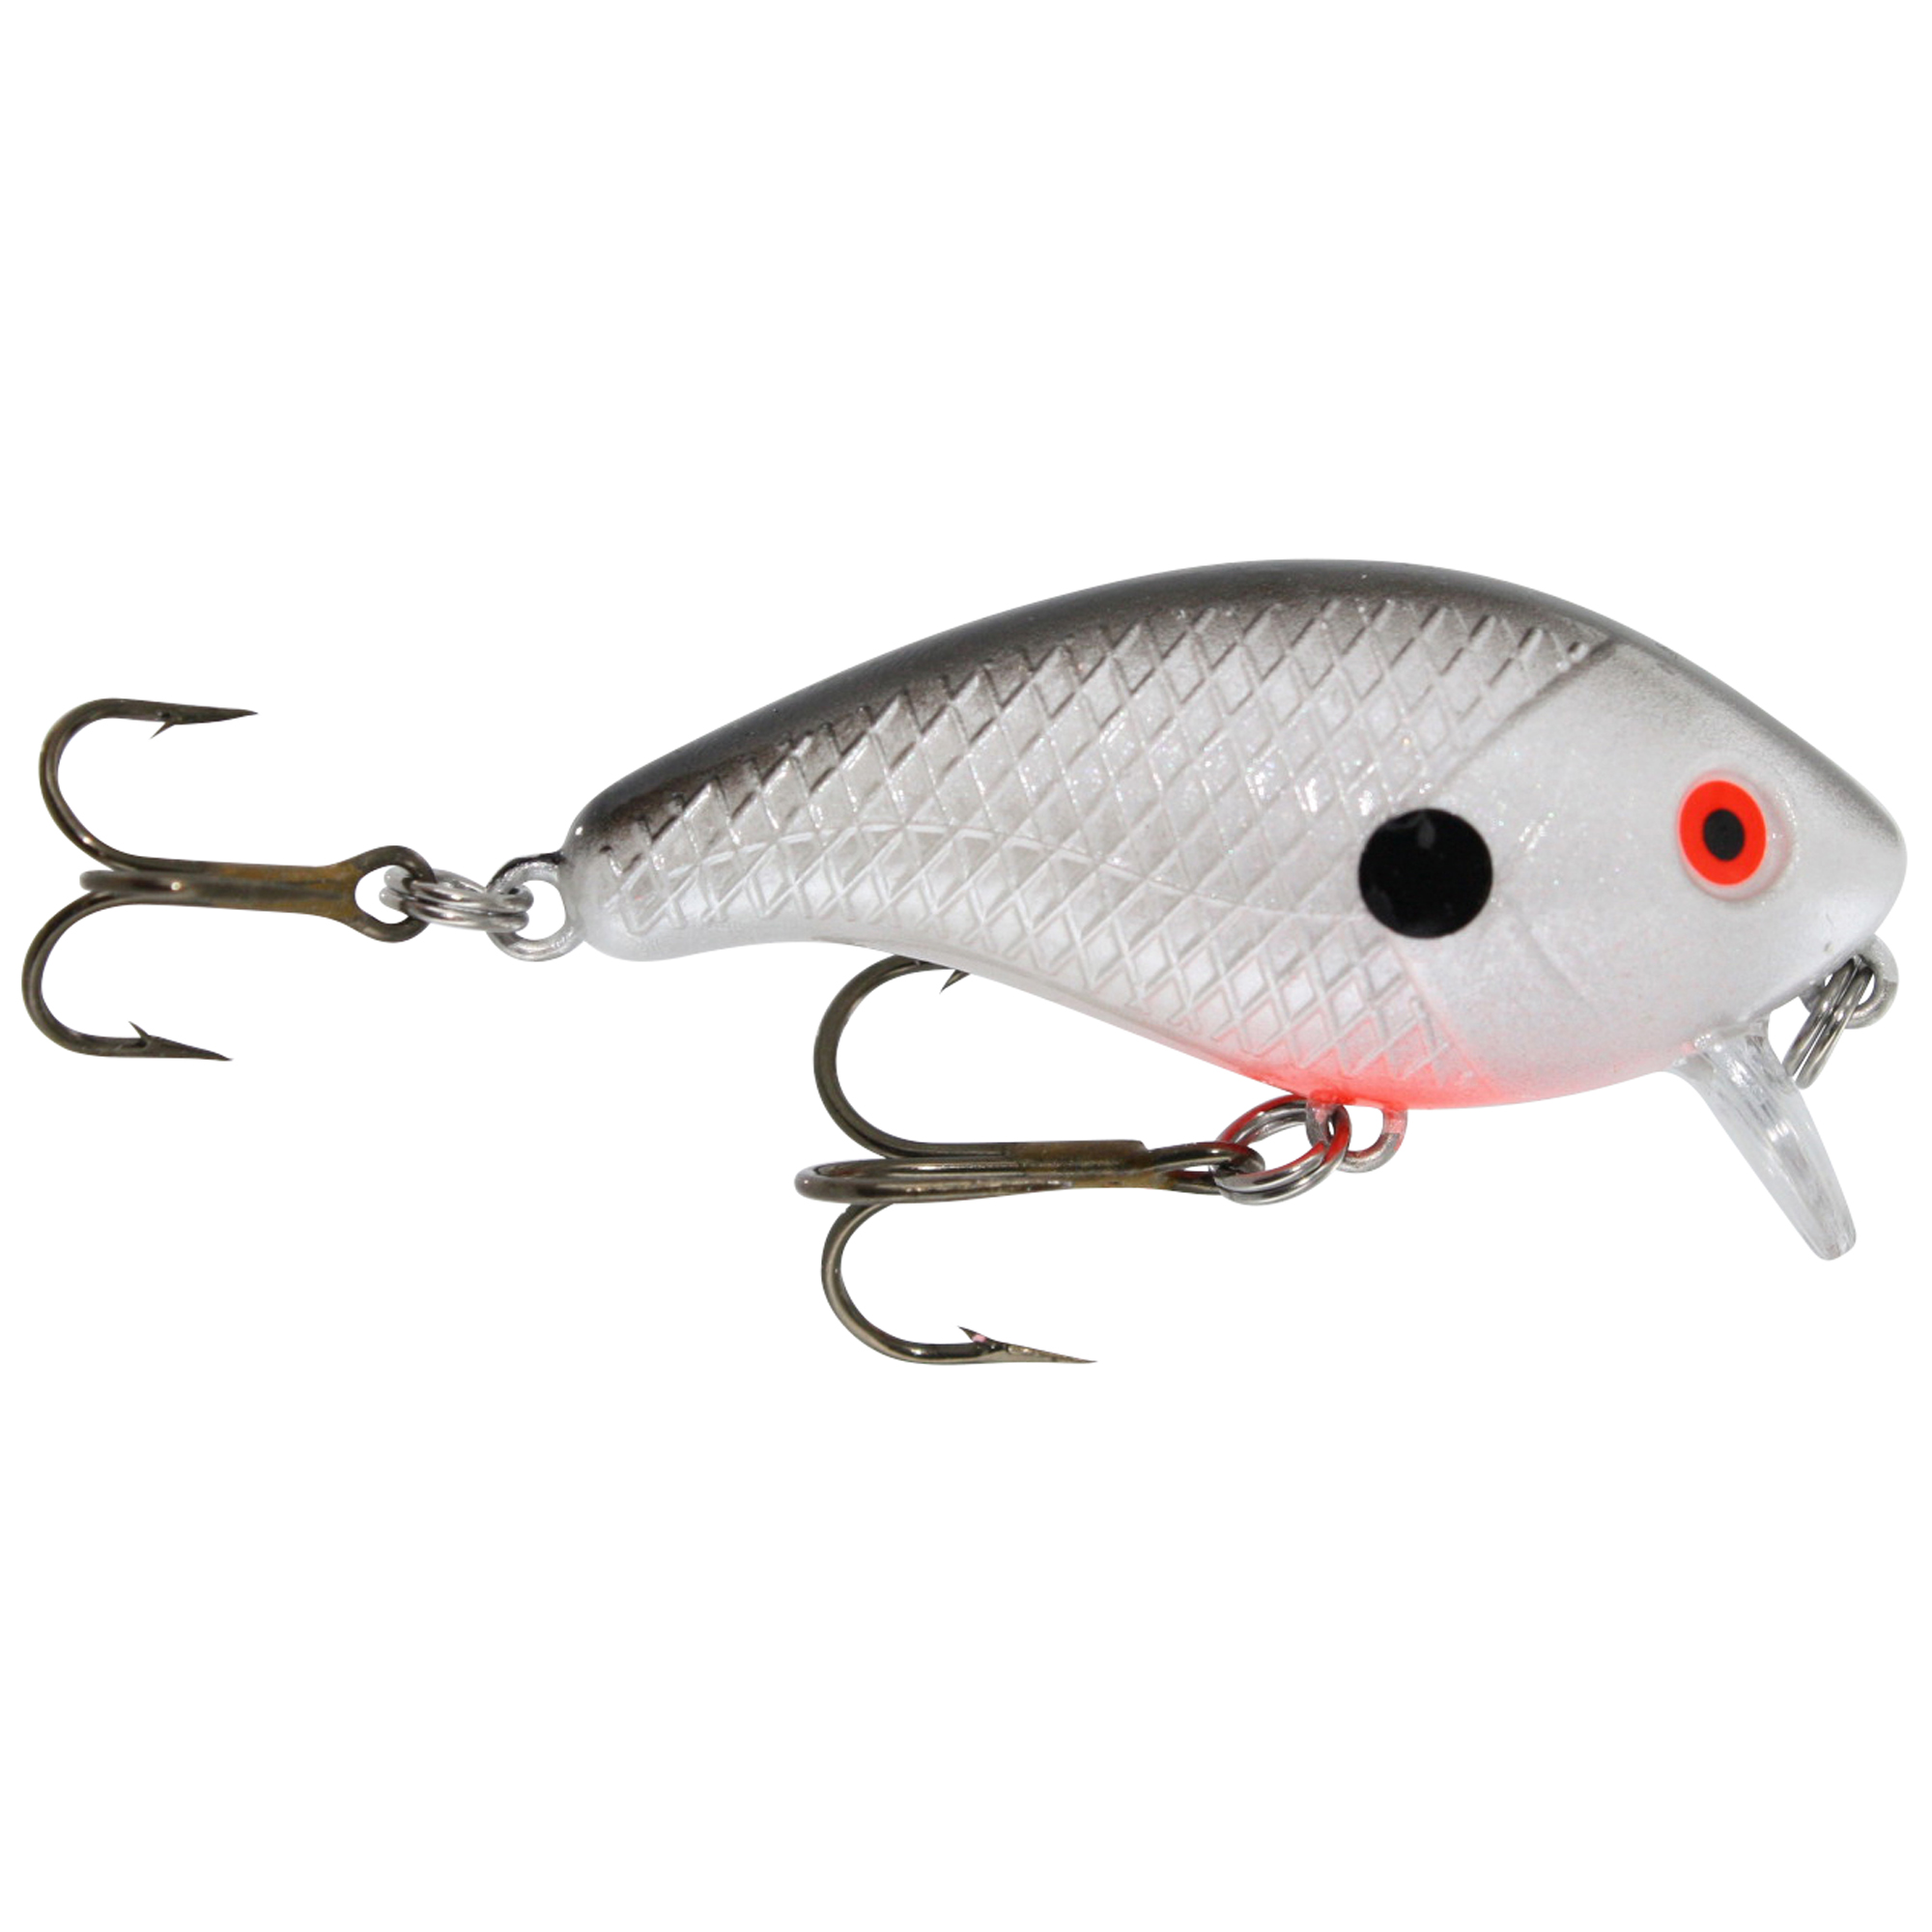 Manns Worm Fishing Lure